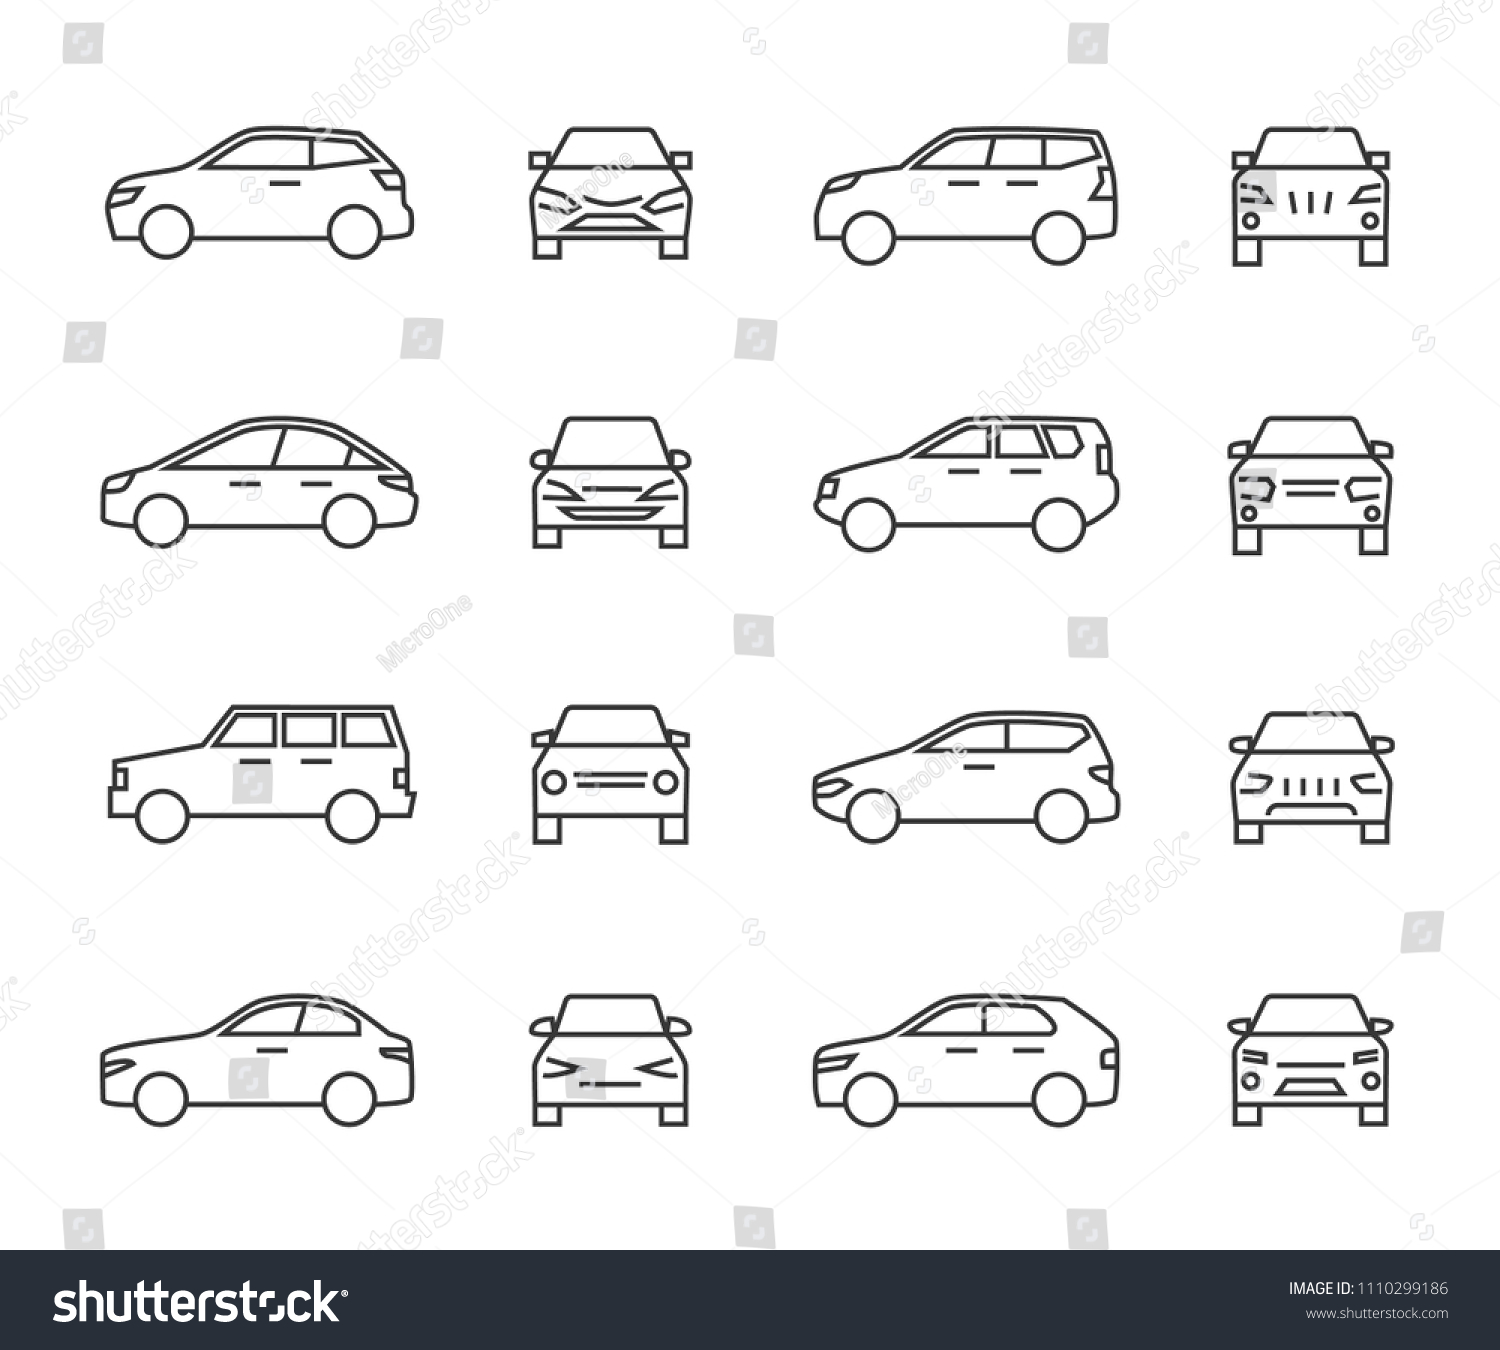 Cars front and side view line signs, auto symbols. Vehicle outline vector icons isolated on white background. Auto vehicle car, illustration of automobile transport #1110299186